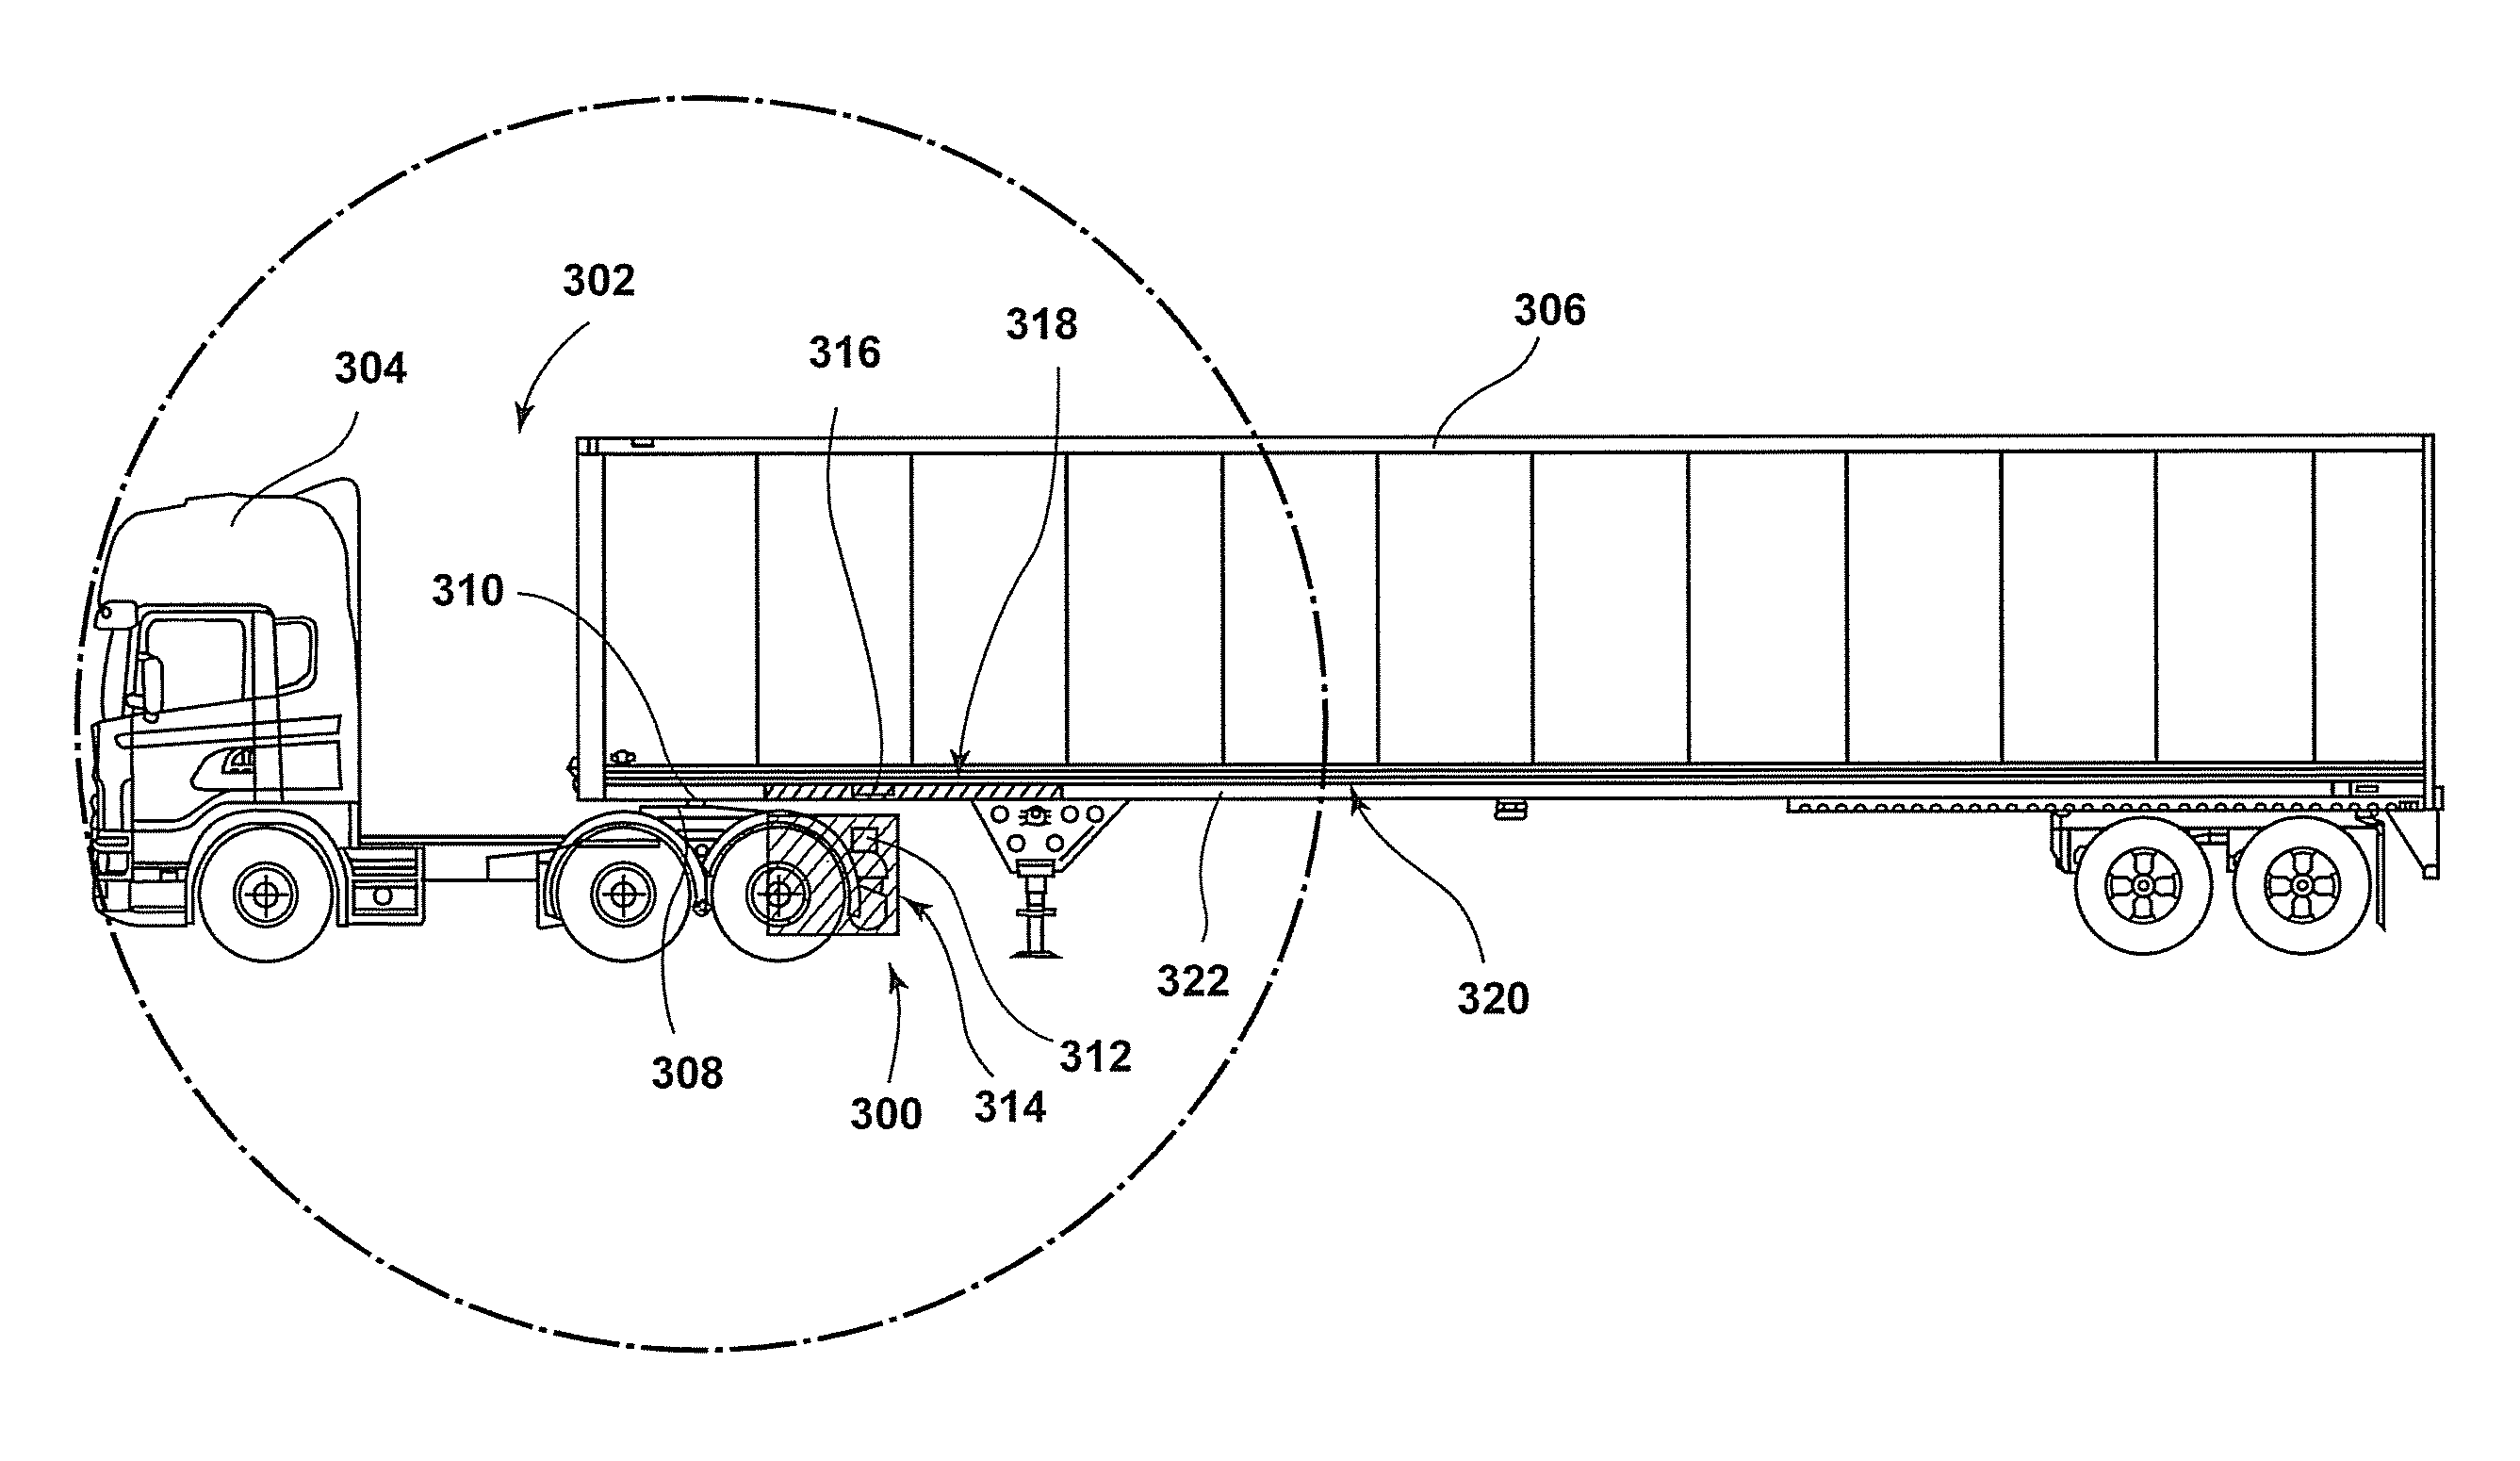 Automatic networking apparatus and system for vehicles